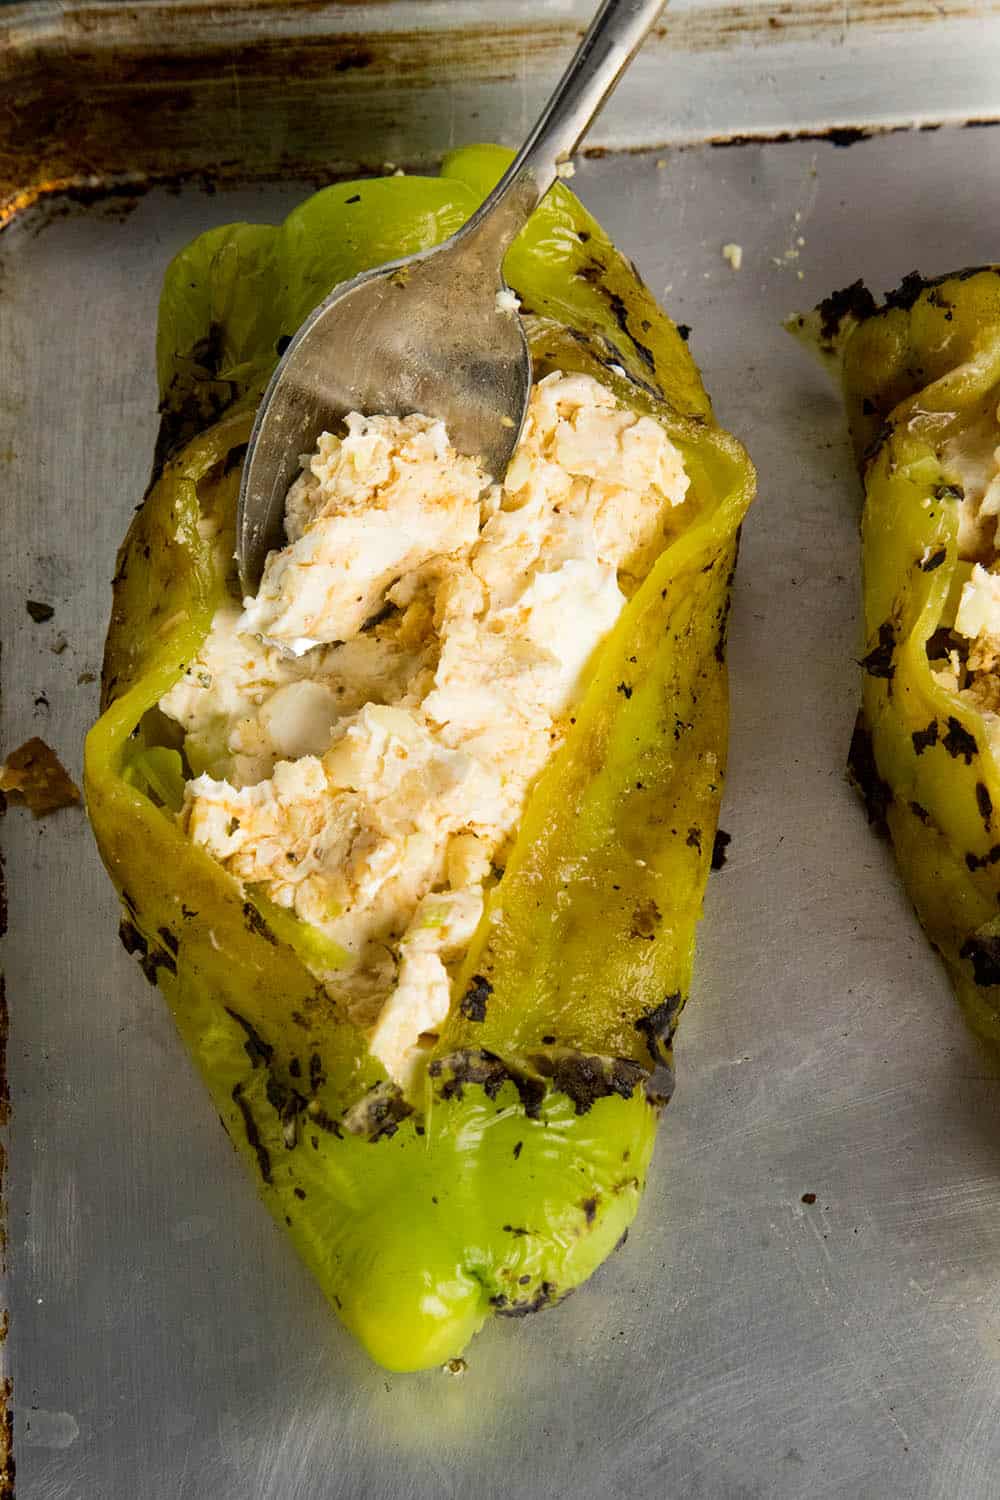 Stuffing the Anaheim peppers with Cajun cream cheese before baking